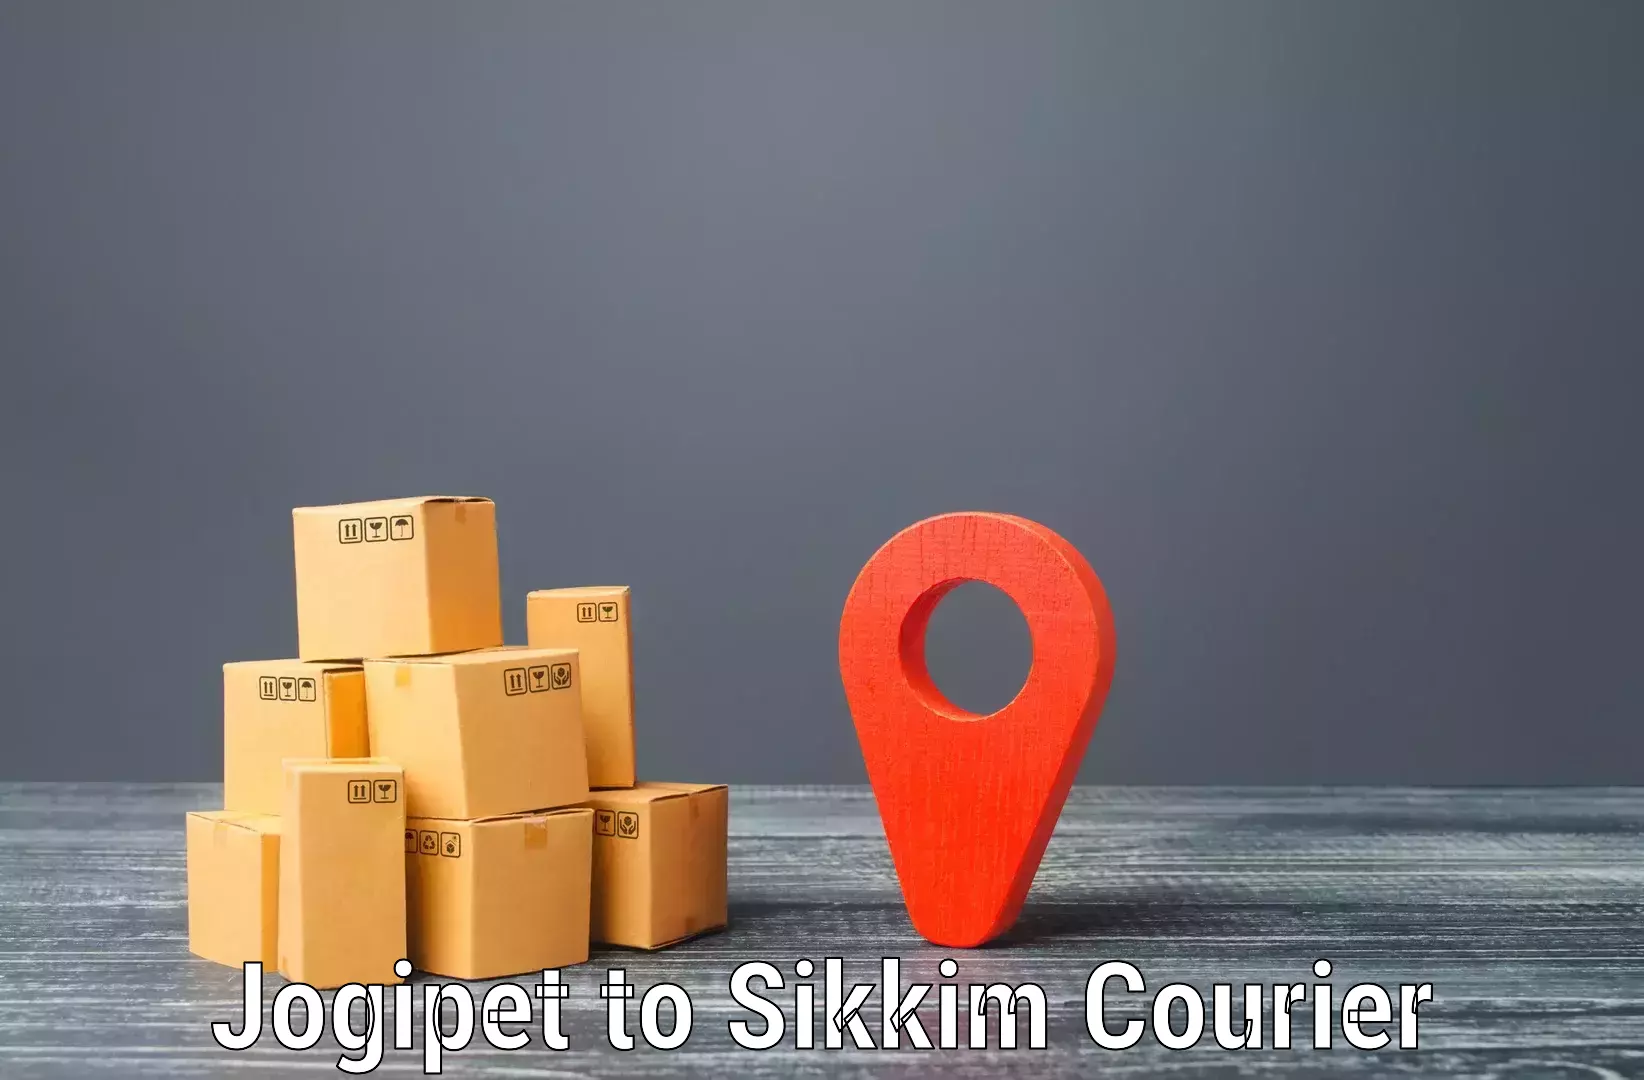 Advanced tracking systems Jogipet to Sikkim